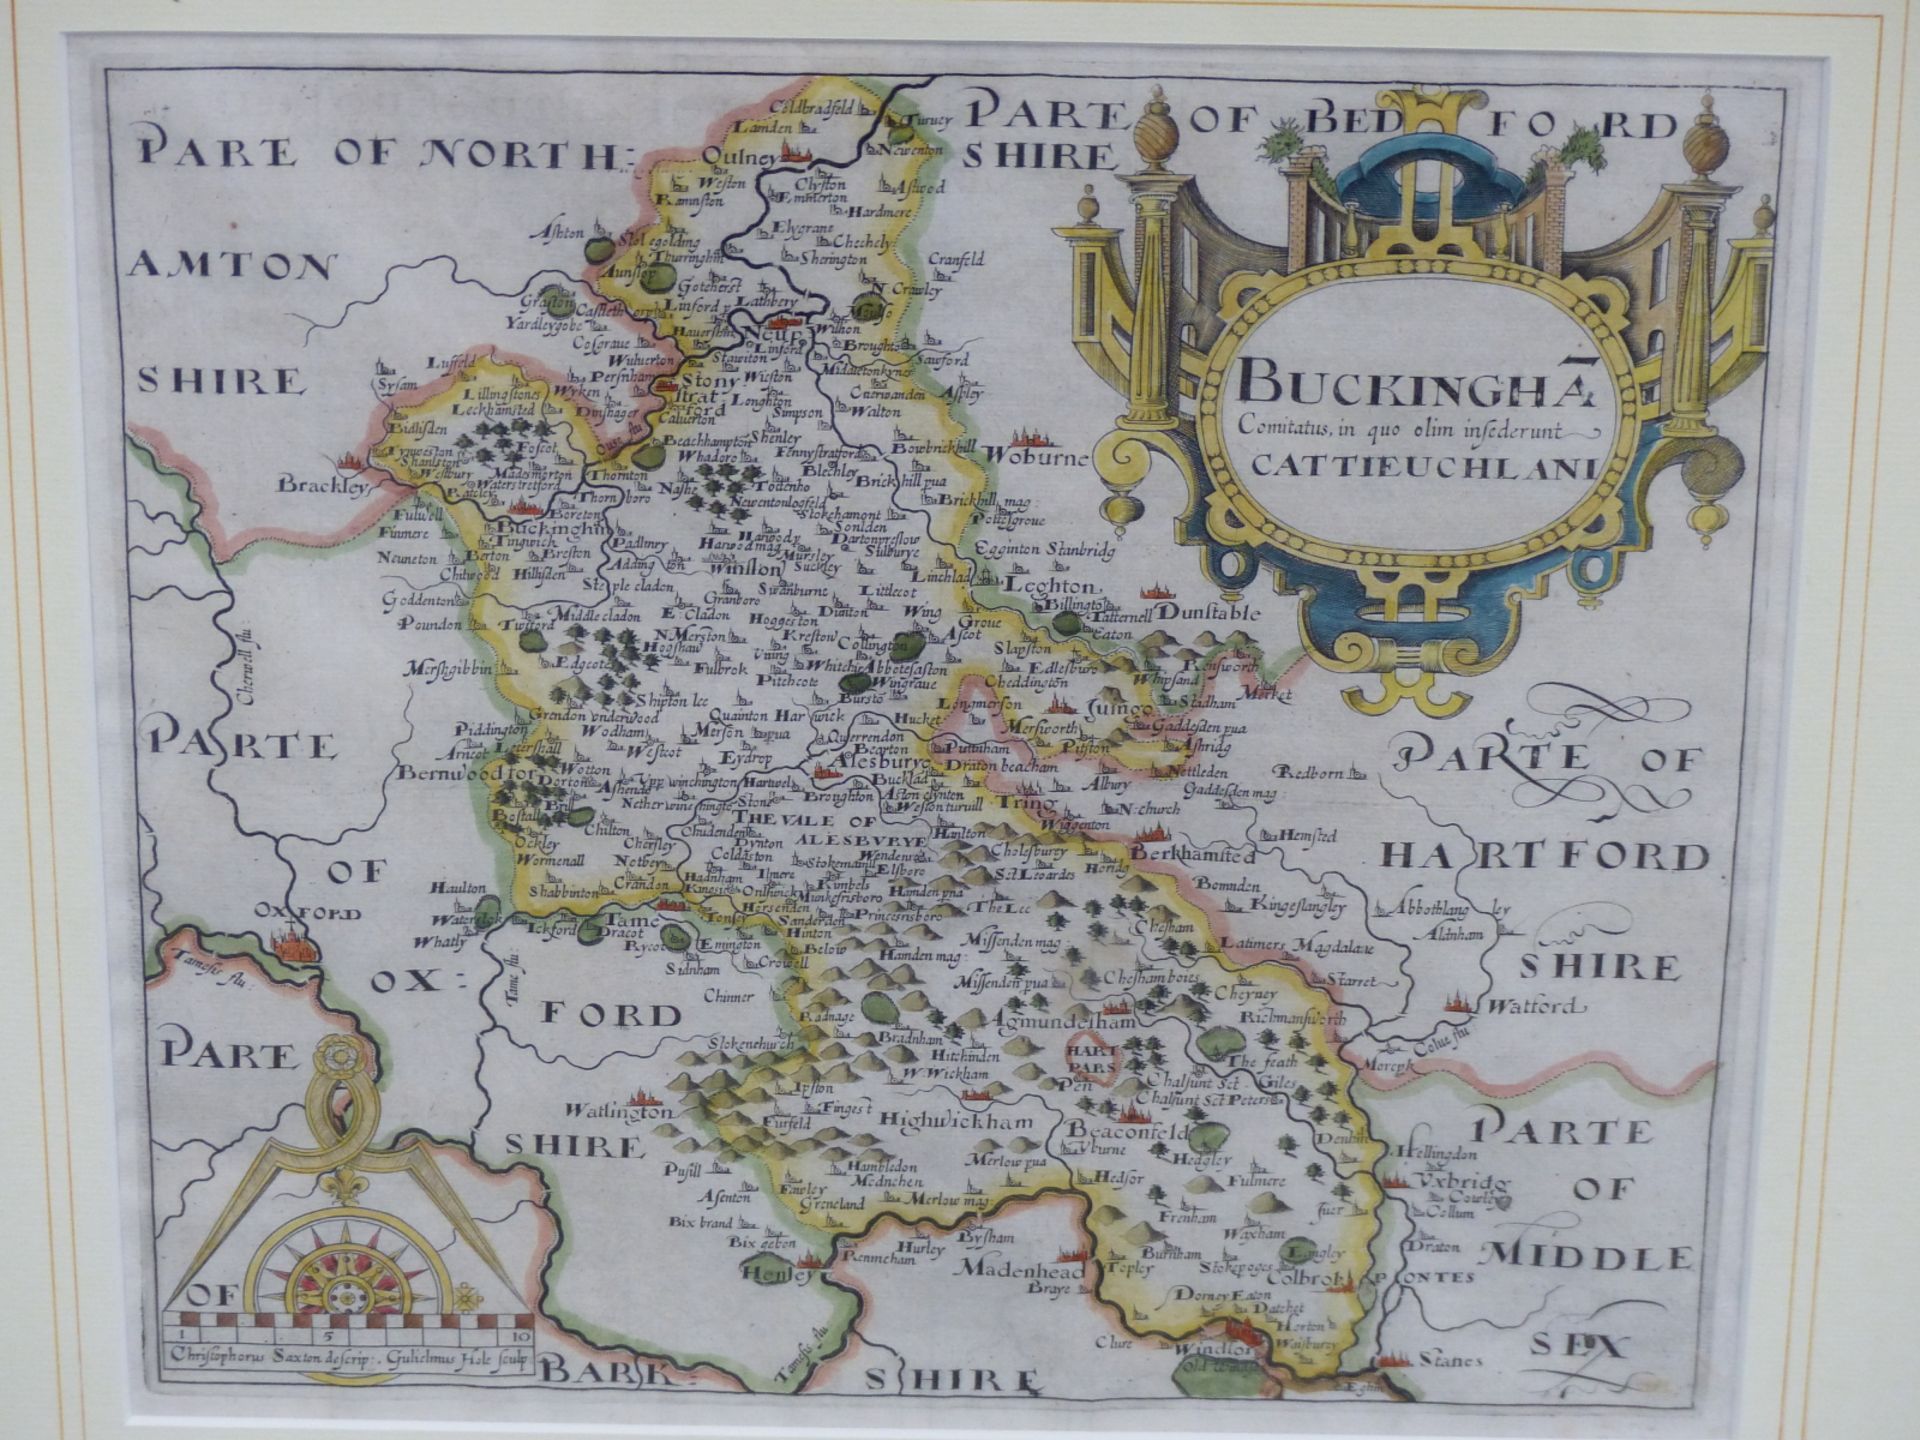 A RARE HAND COLOURED EARLY 17TH CENTURY MAP OF BUCKINGHAMSHIRE BY SAXTON & HOLE. C1610. - Image 2 of 3